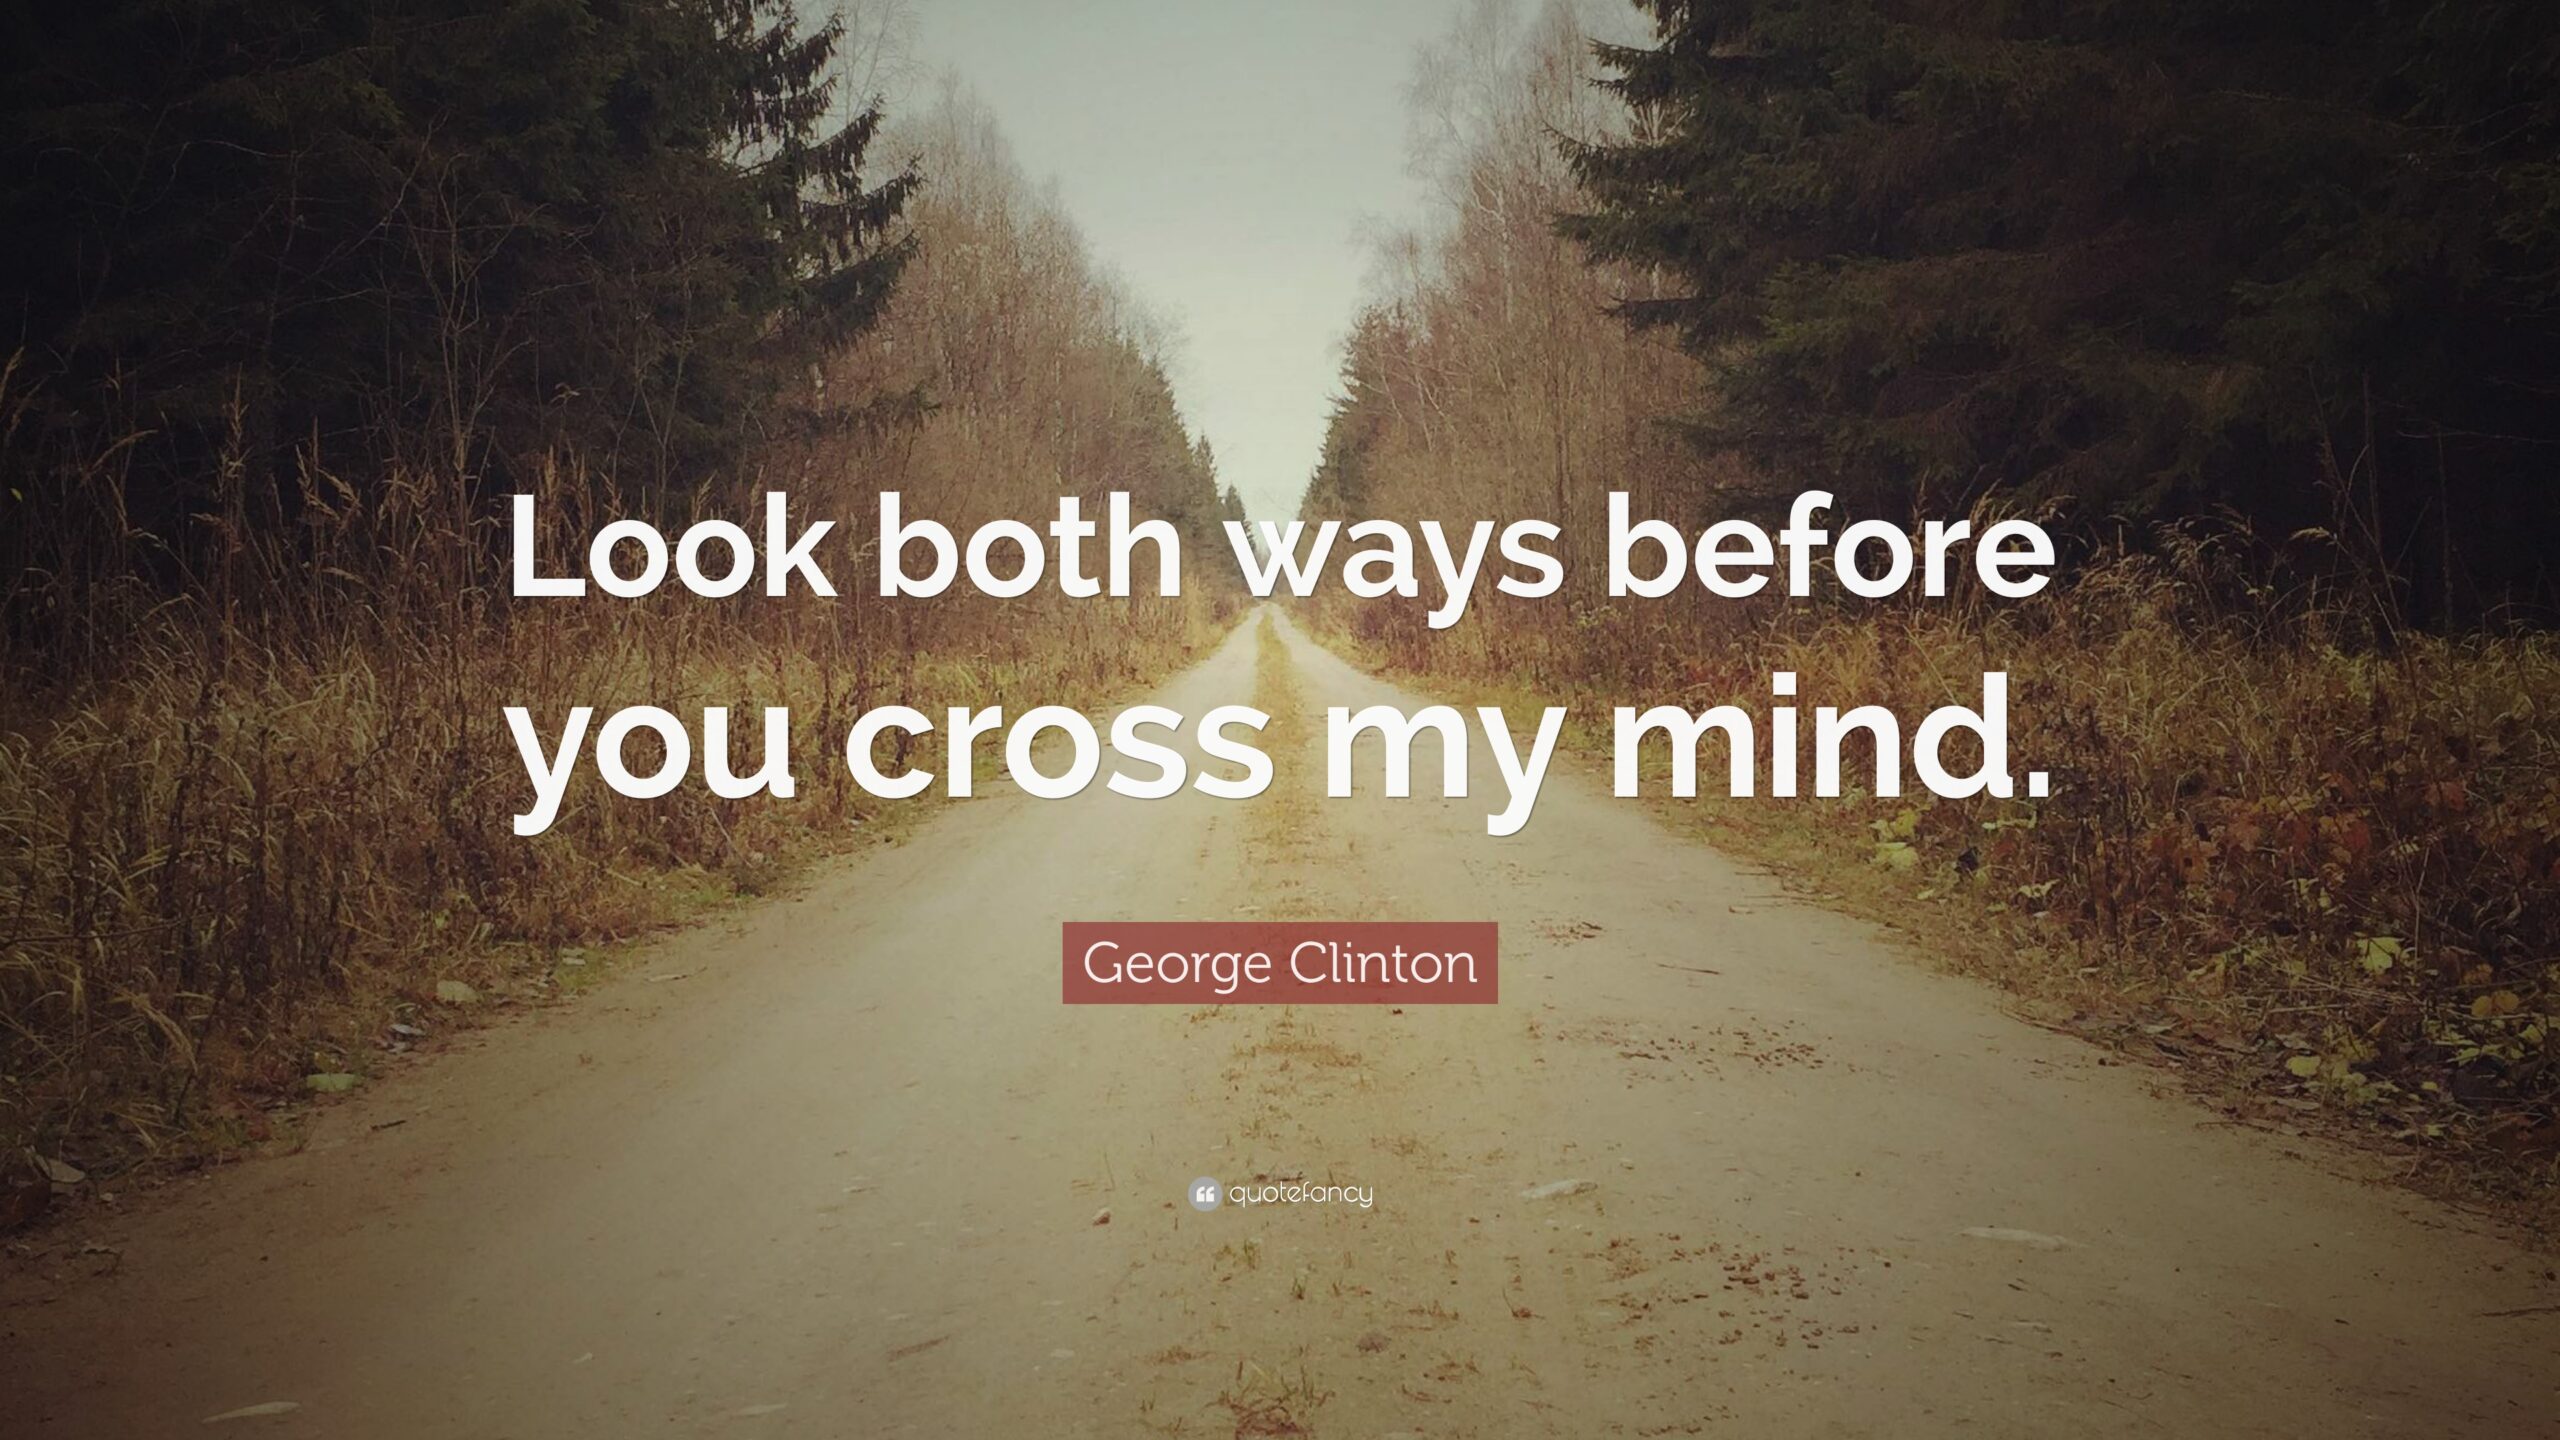 George Clinton Quote: 